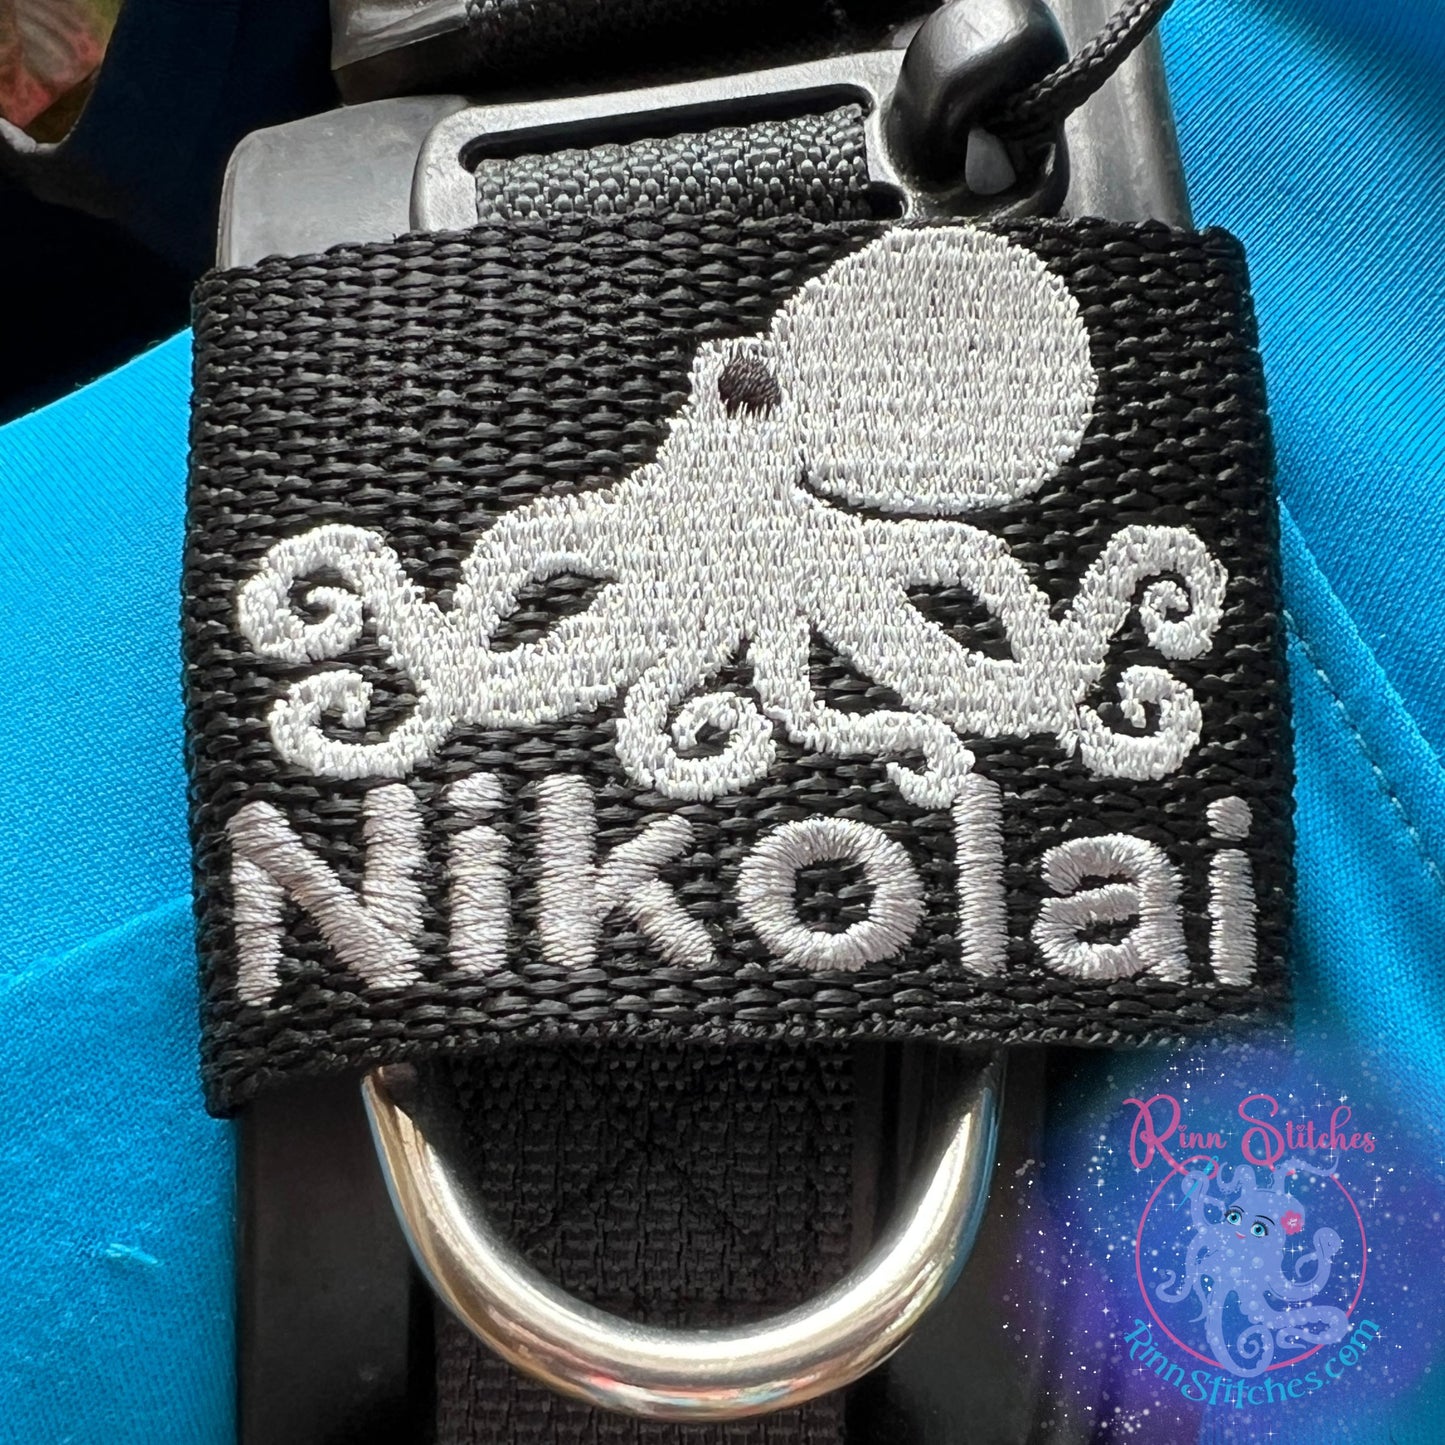 Tako (Octopus) Personalized BCD Tag